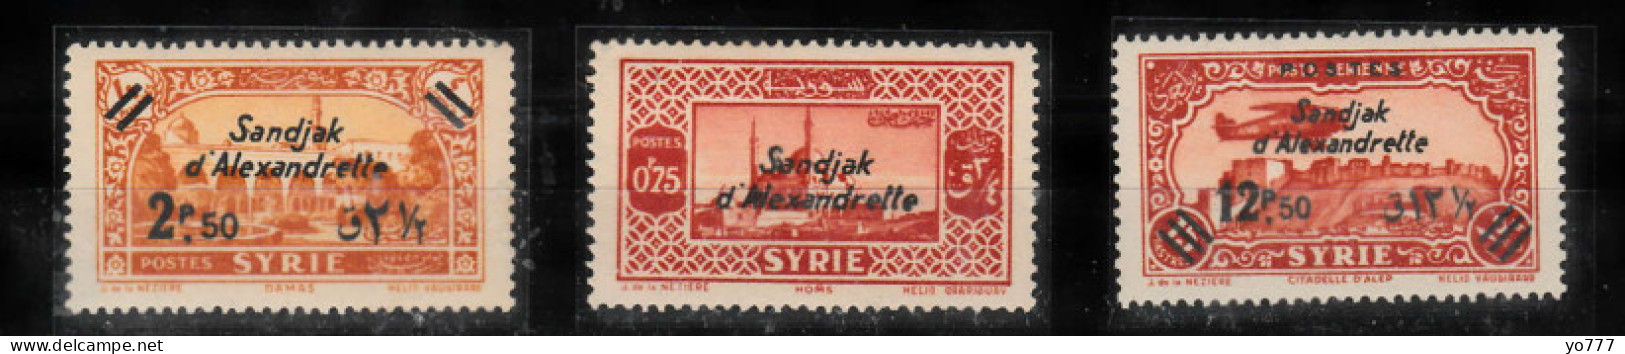 (H-011/12) 1938 HATAY STAMPS WITH BLACK SANDJAK D'ALEXANDRETTE SURCHARGE ON SYRIA POSTAGE AIRPOST STAMPS MNH** - 1934-39 Sandjak D'Alexandrette & Hatay